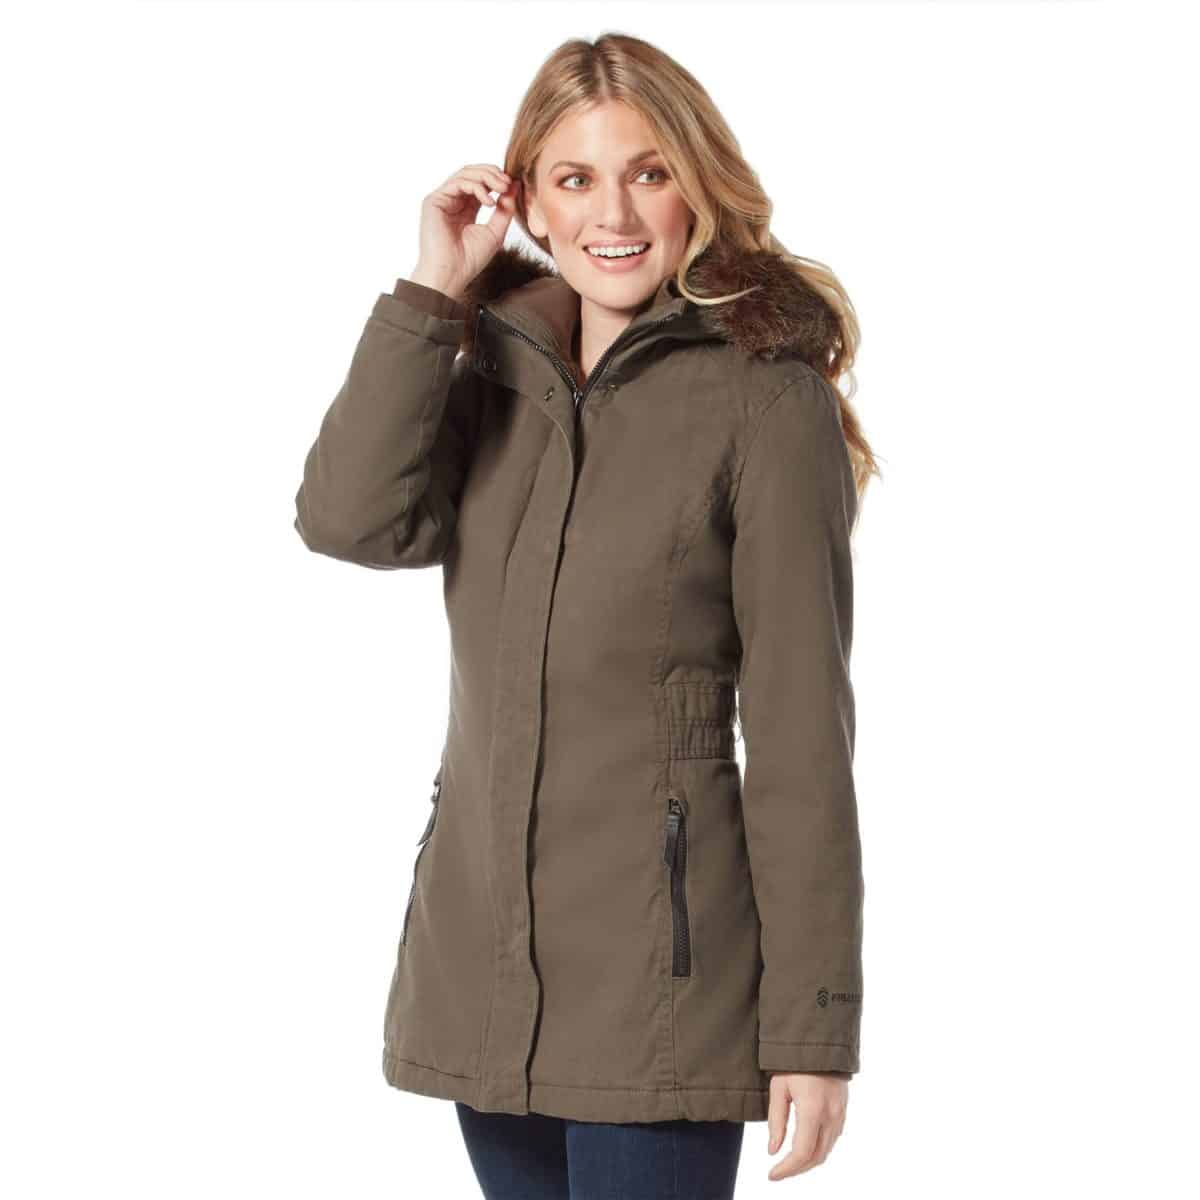 Free Country Jackets Review - Must Read This Before Buying